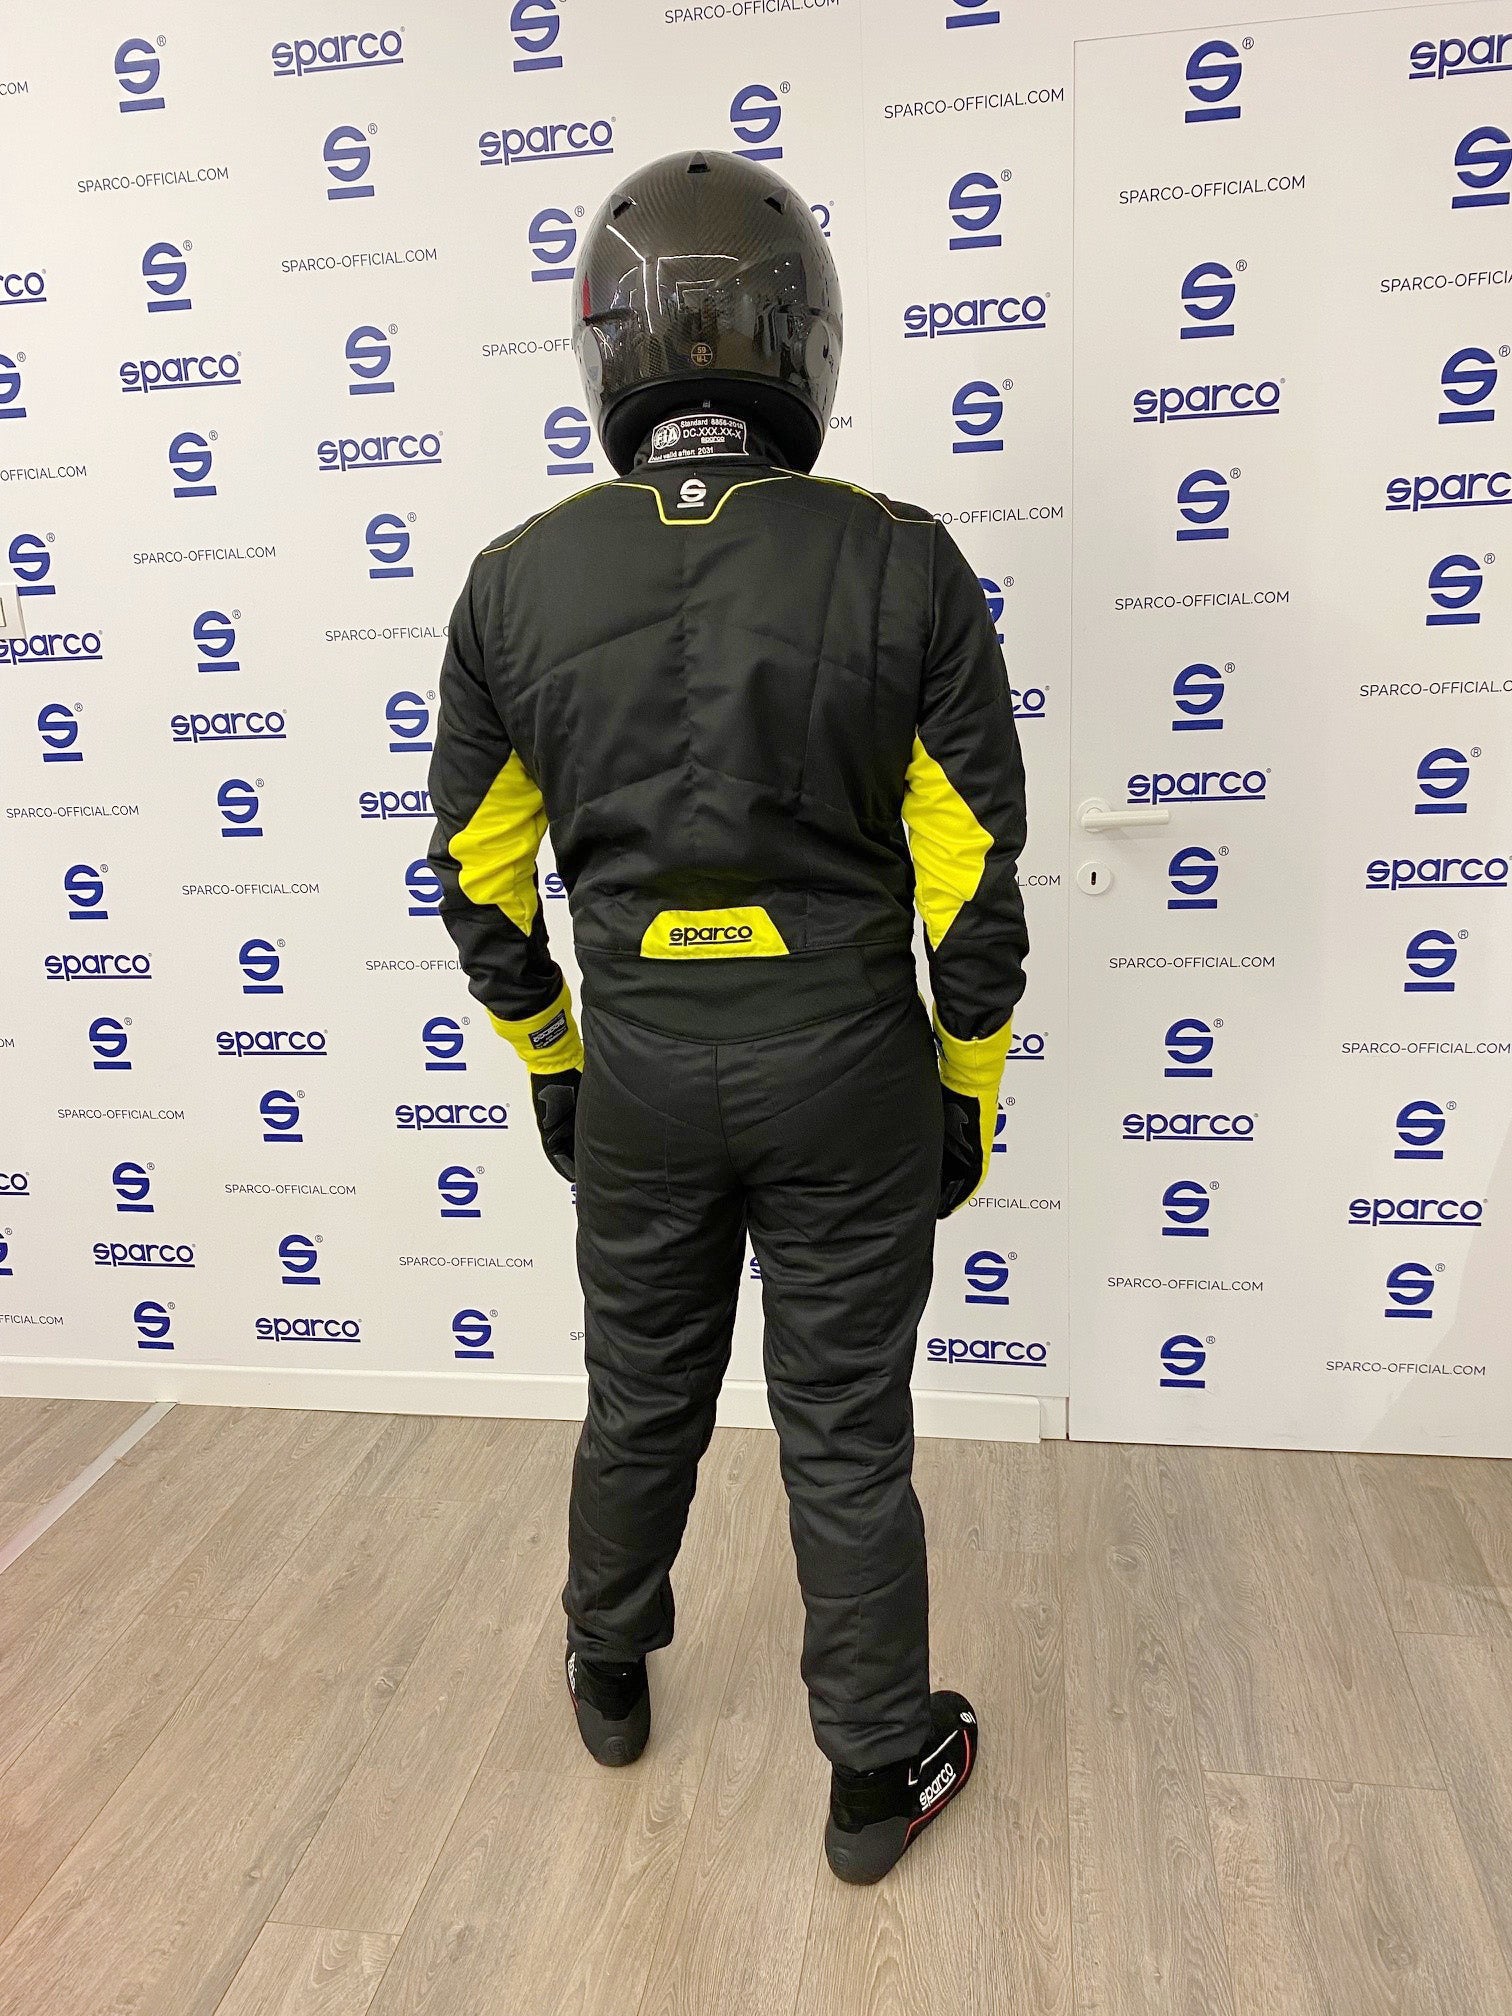 SPARCO 00109358NRGF SPRINT 2022 Racing suit, FIA 8856-2018, black/yellow, size 58 Photo-2 